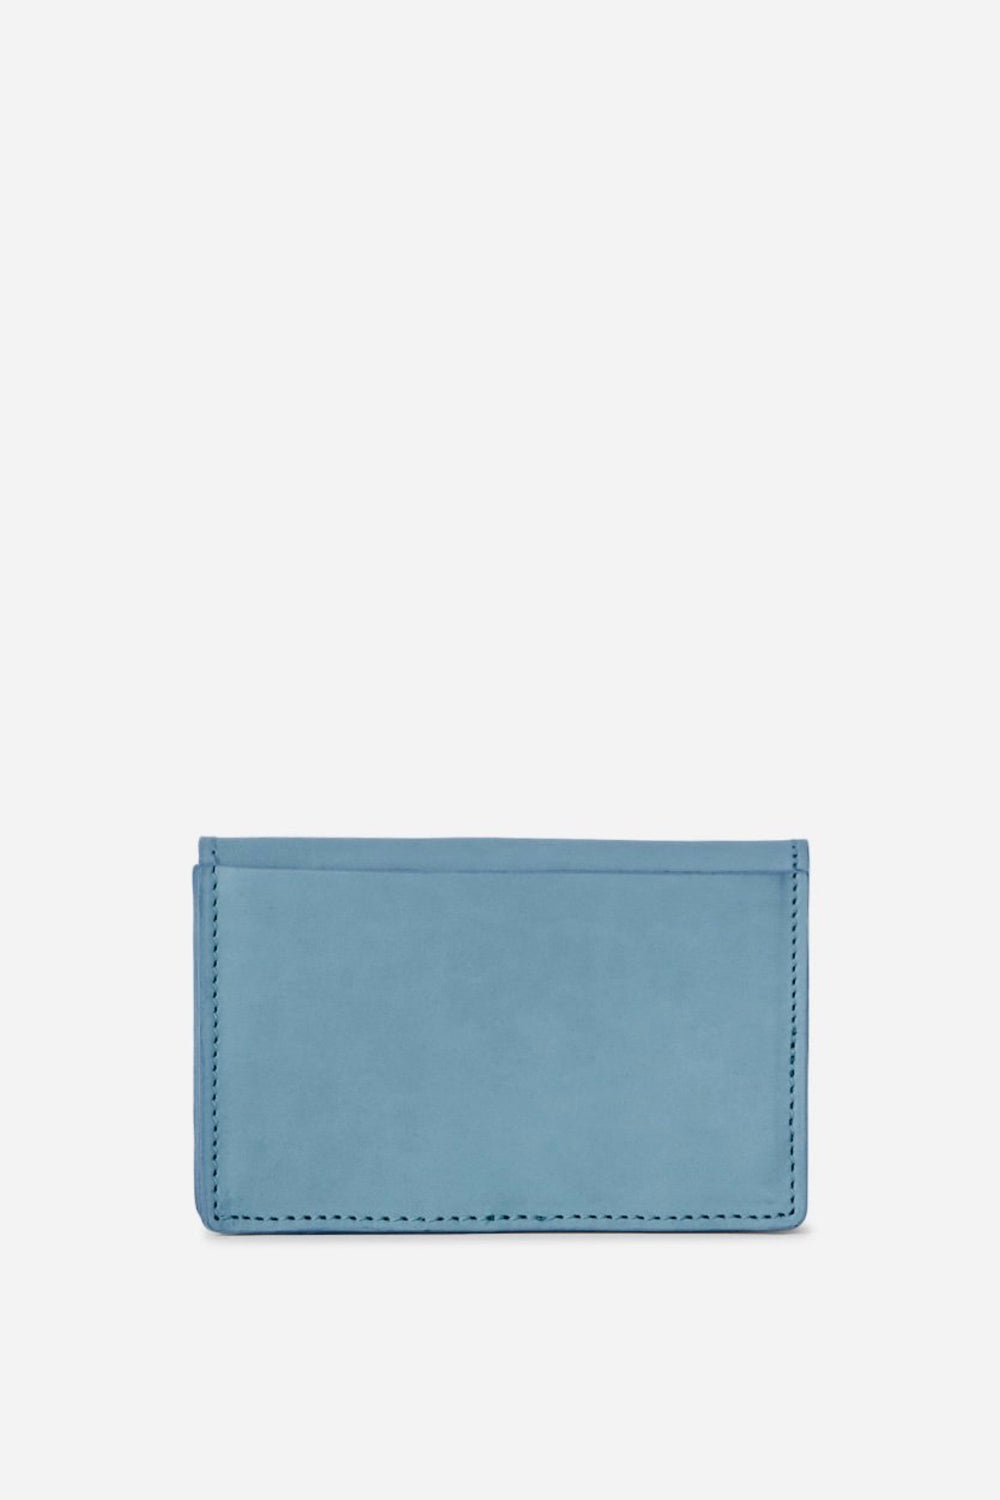 Pacific Oyster Wallet